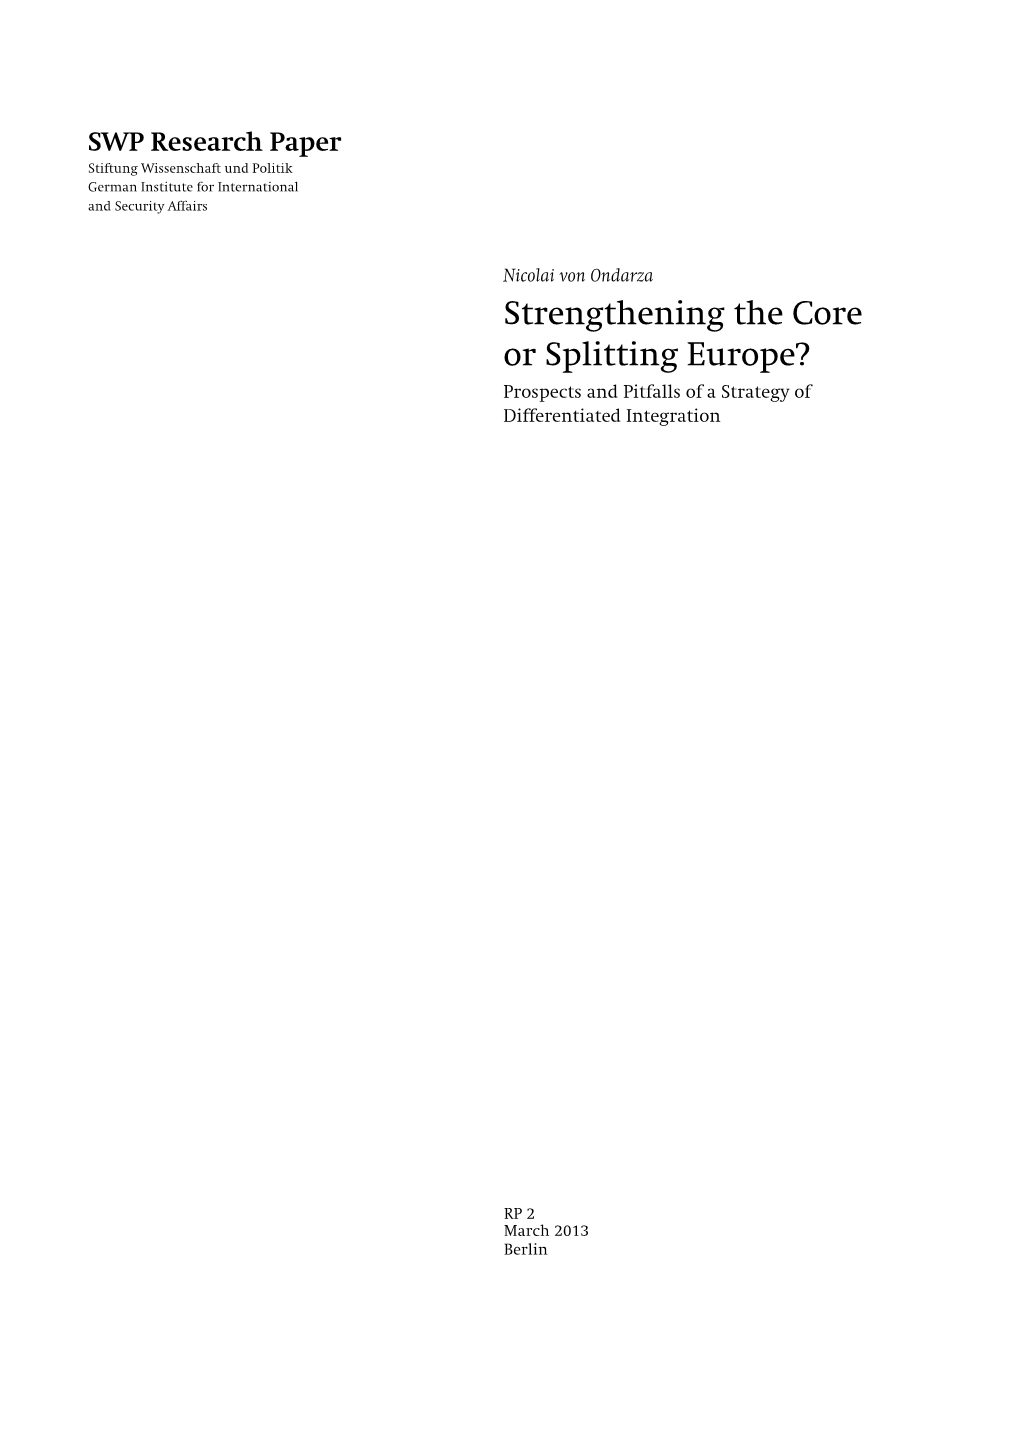 Strengthening the Core Or Splitting Europe? Prospects and Pitfalls of a Strategy of Differentiated Integration